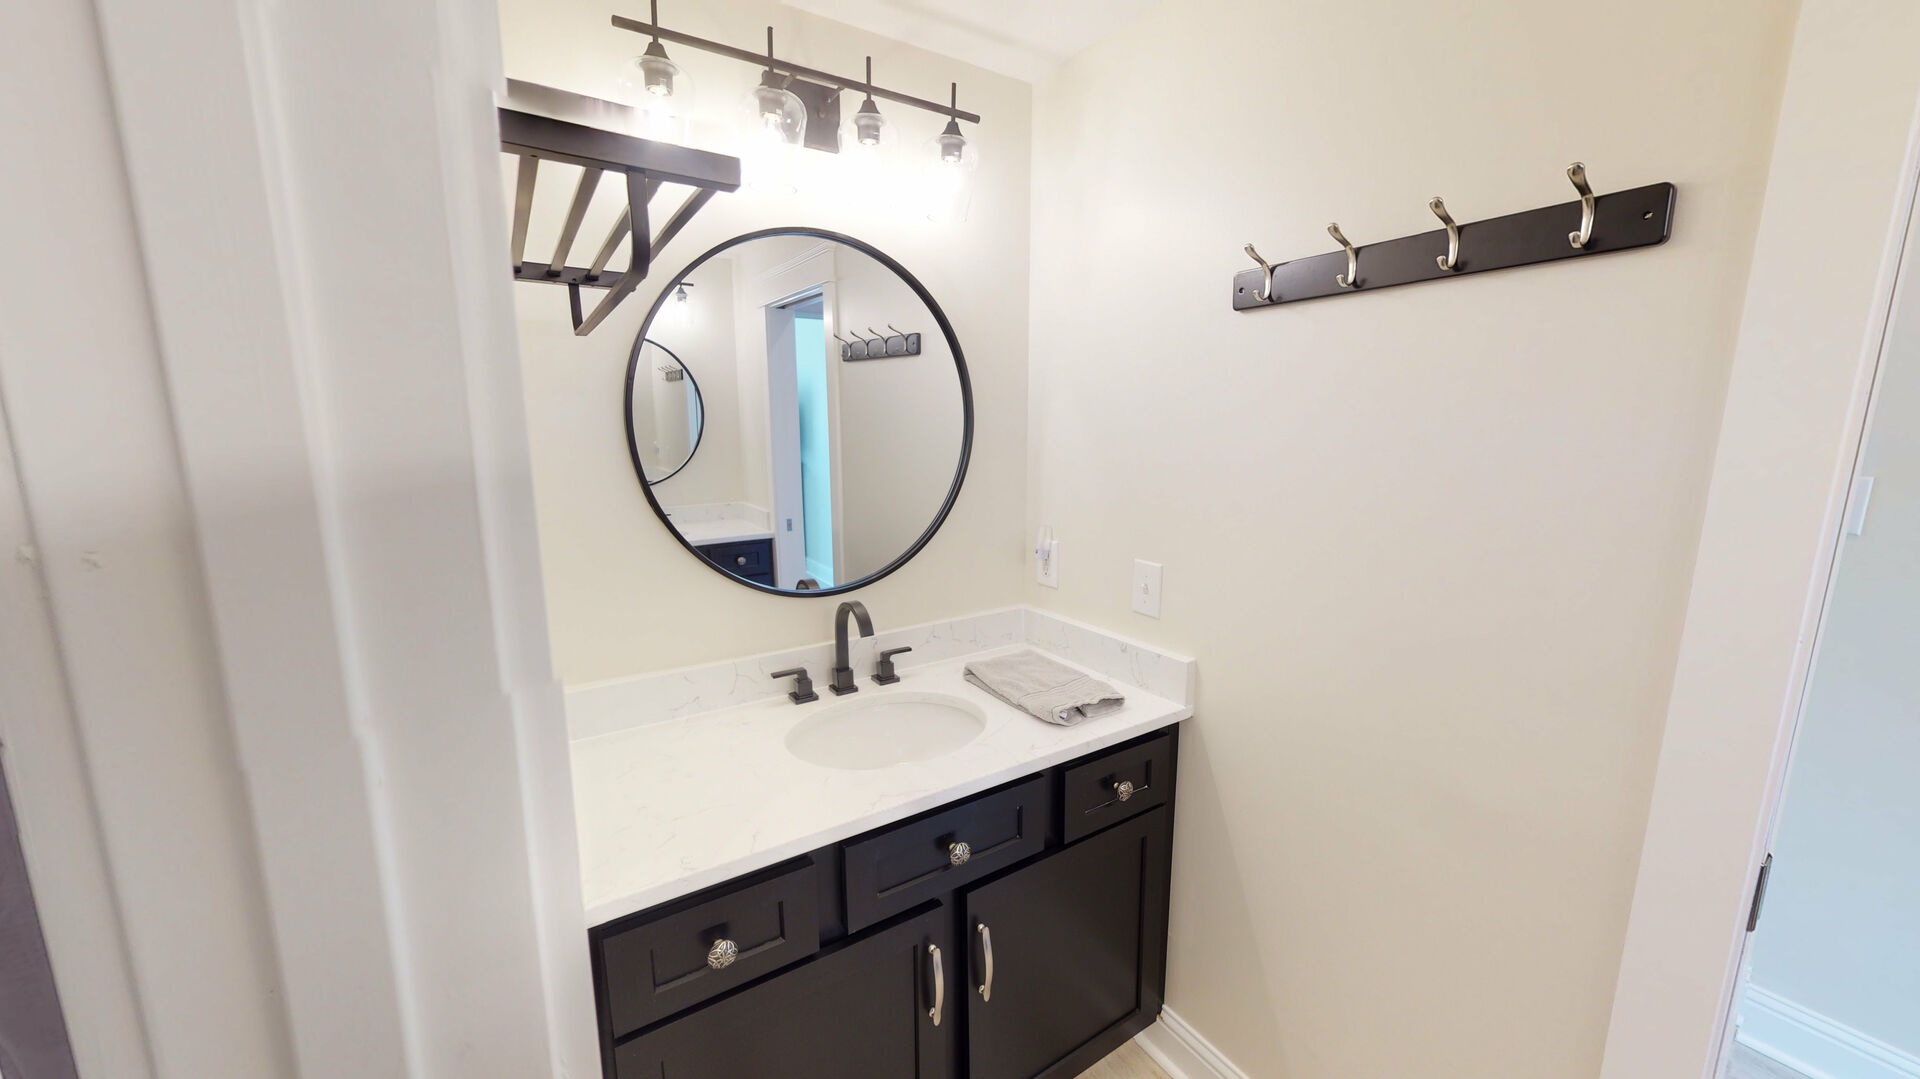 Bath shared between bedroom 3 and 4, double sinks, vanities and shower-tub combo